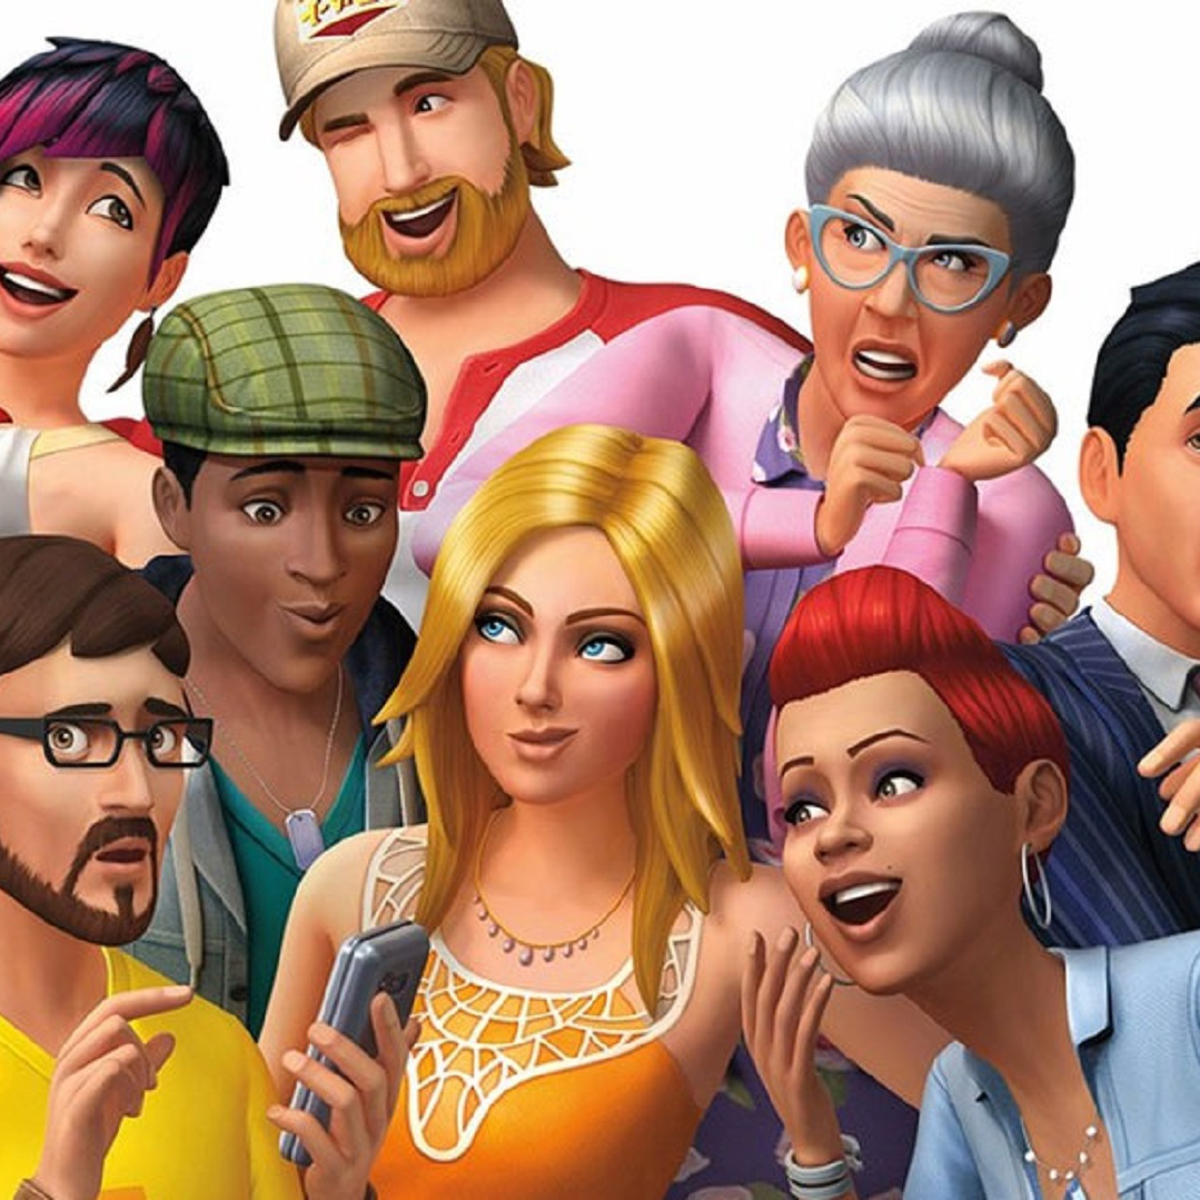 The Sims 4 Cheats: Complete List Of Cheat Codes For PC, Xbox Series X